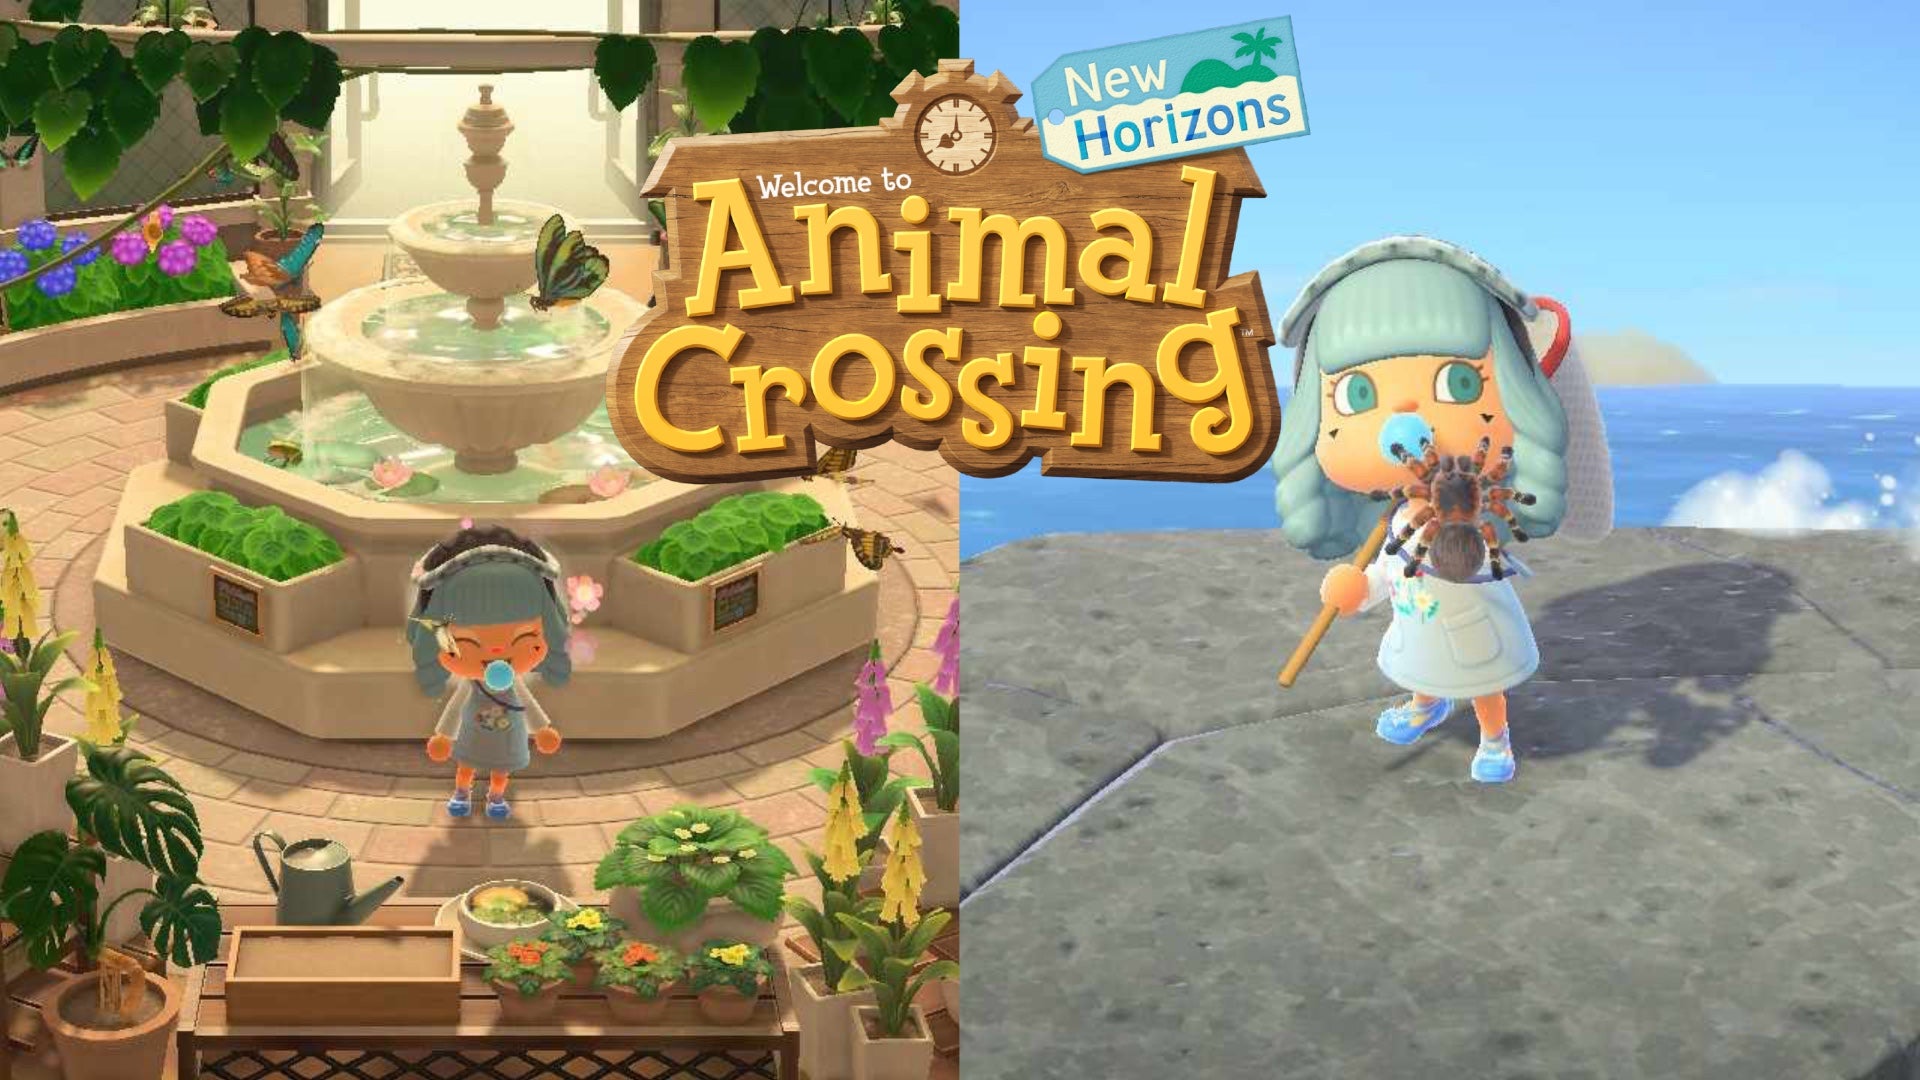 On the left is a player inside a butterfly exhibit in Animal Crossing, the right shows a player holding a captured tarantula.